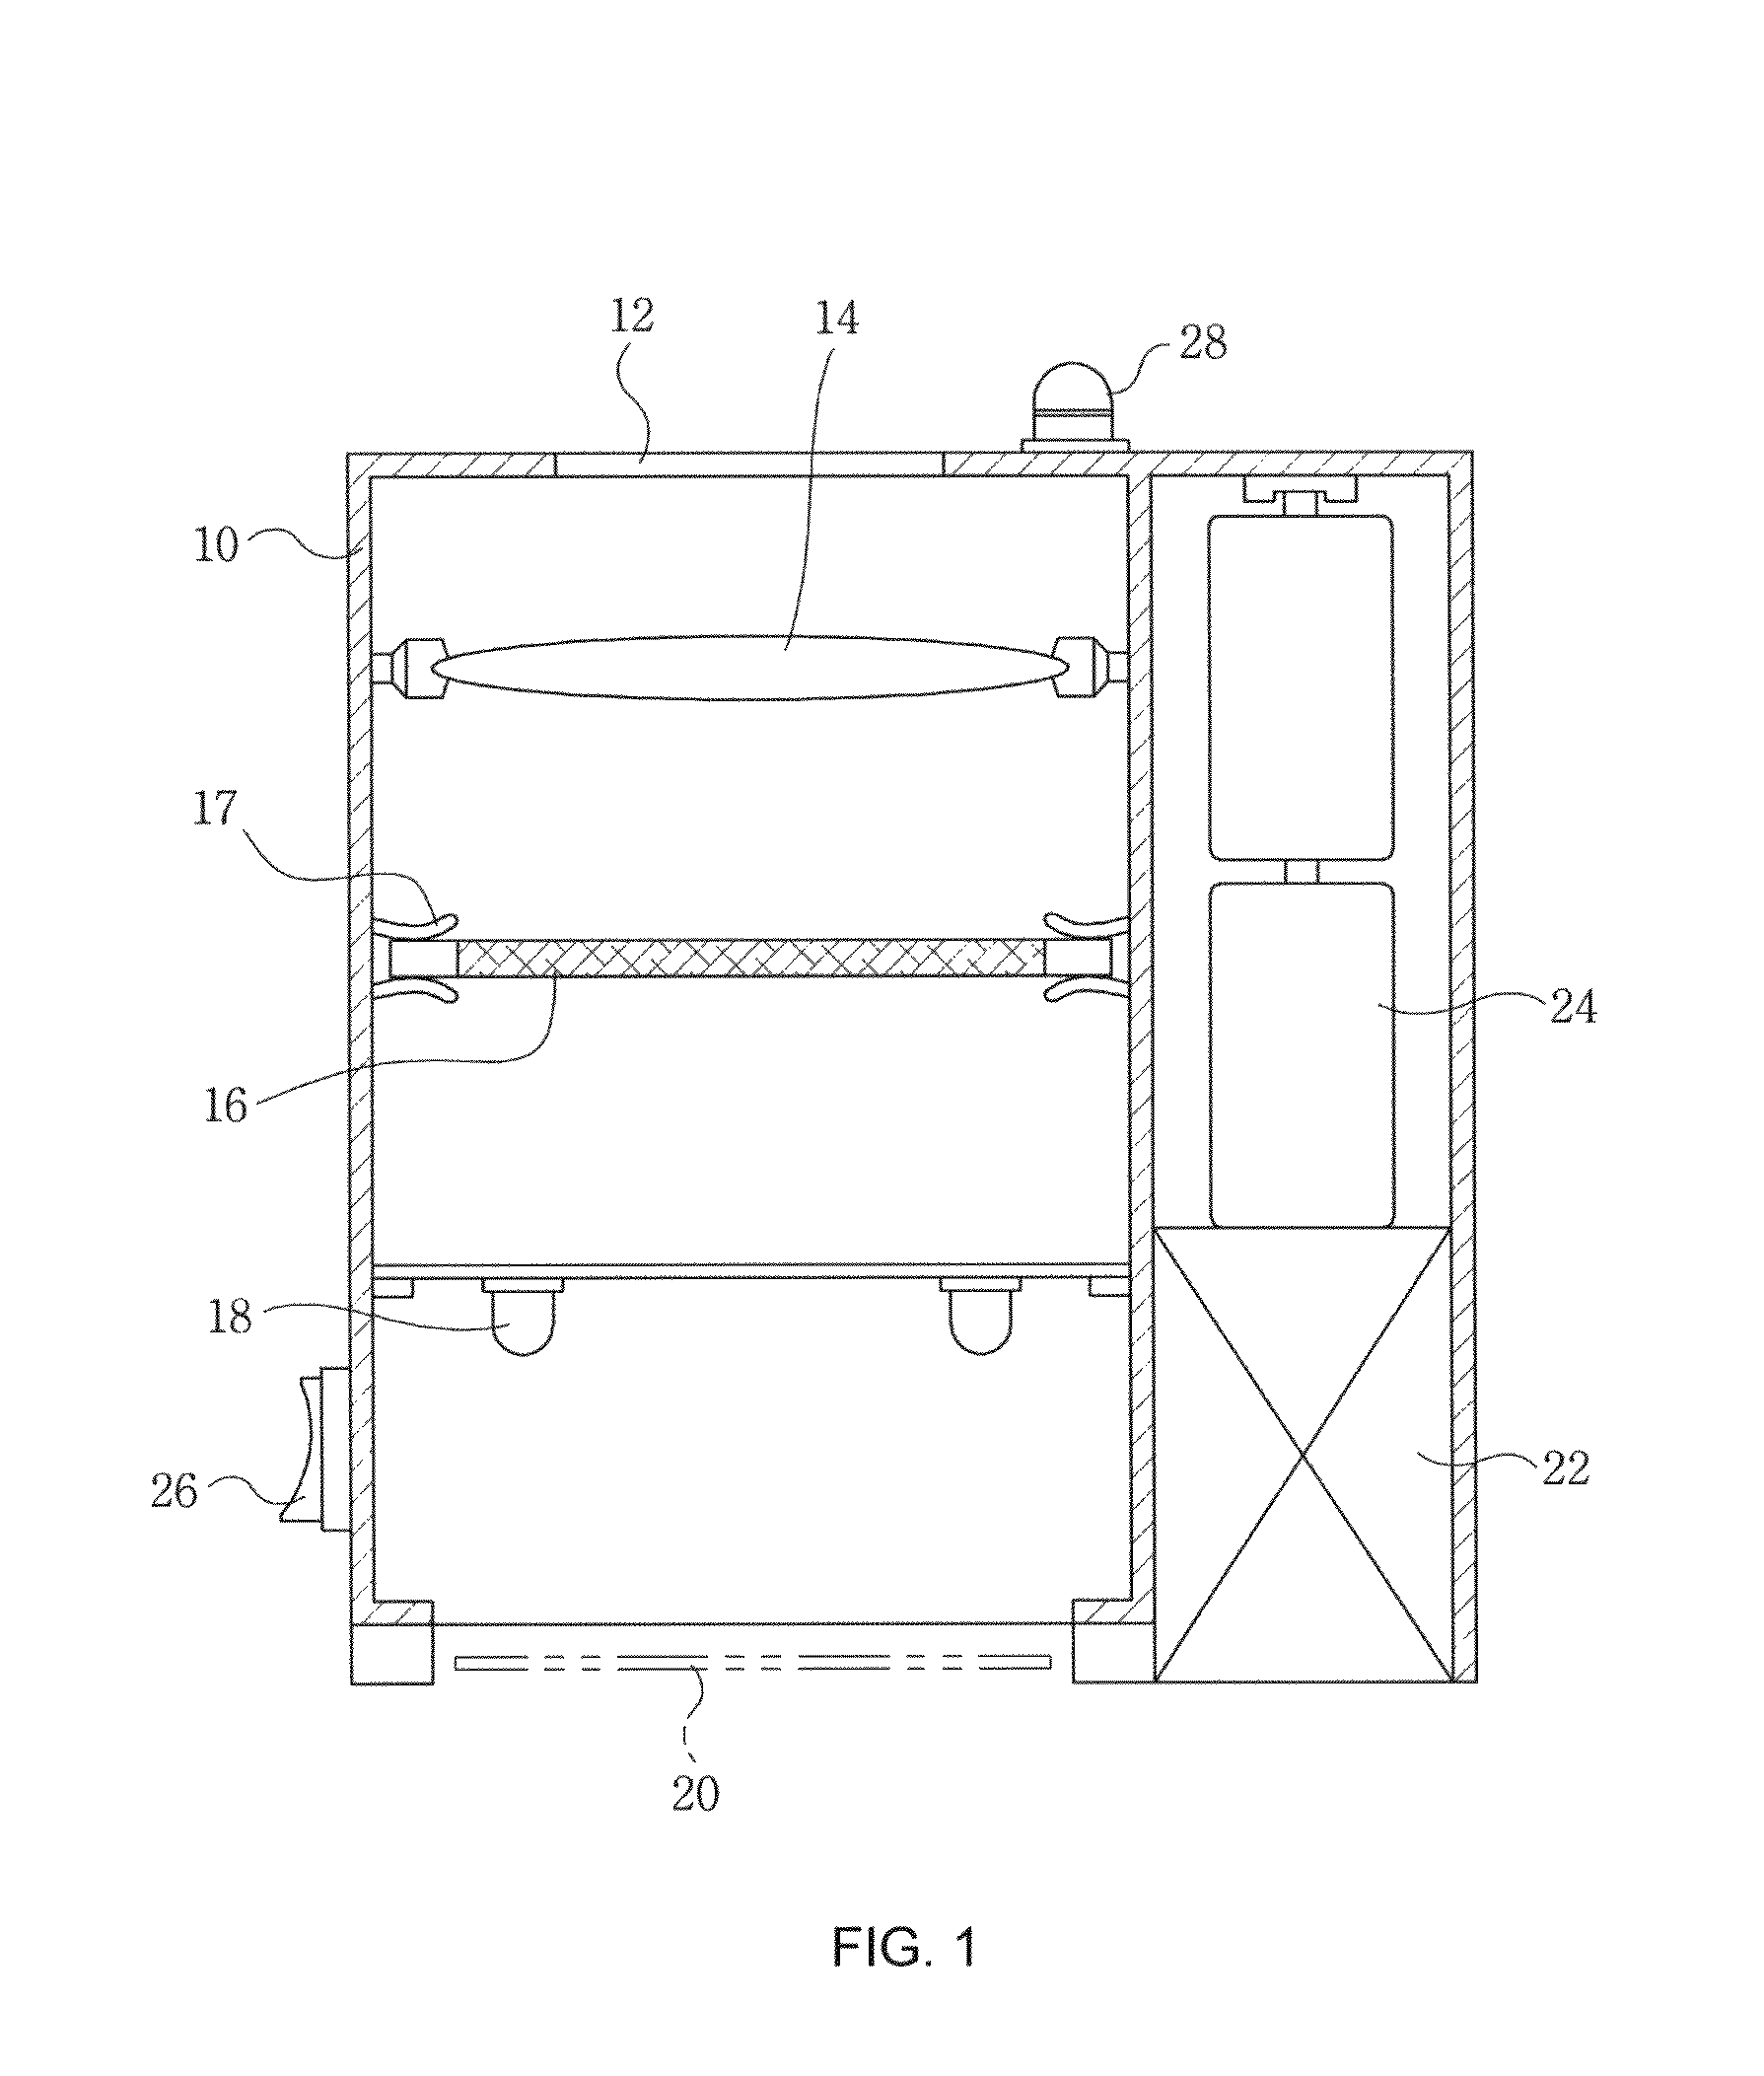 Portable security printed matter authentication device